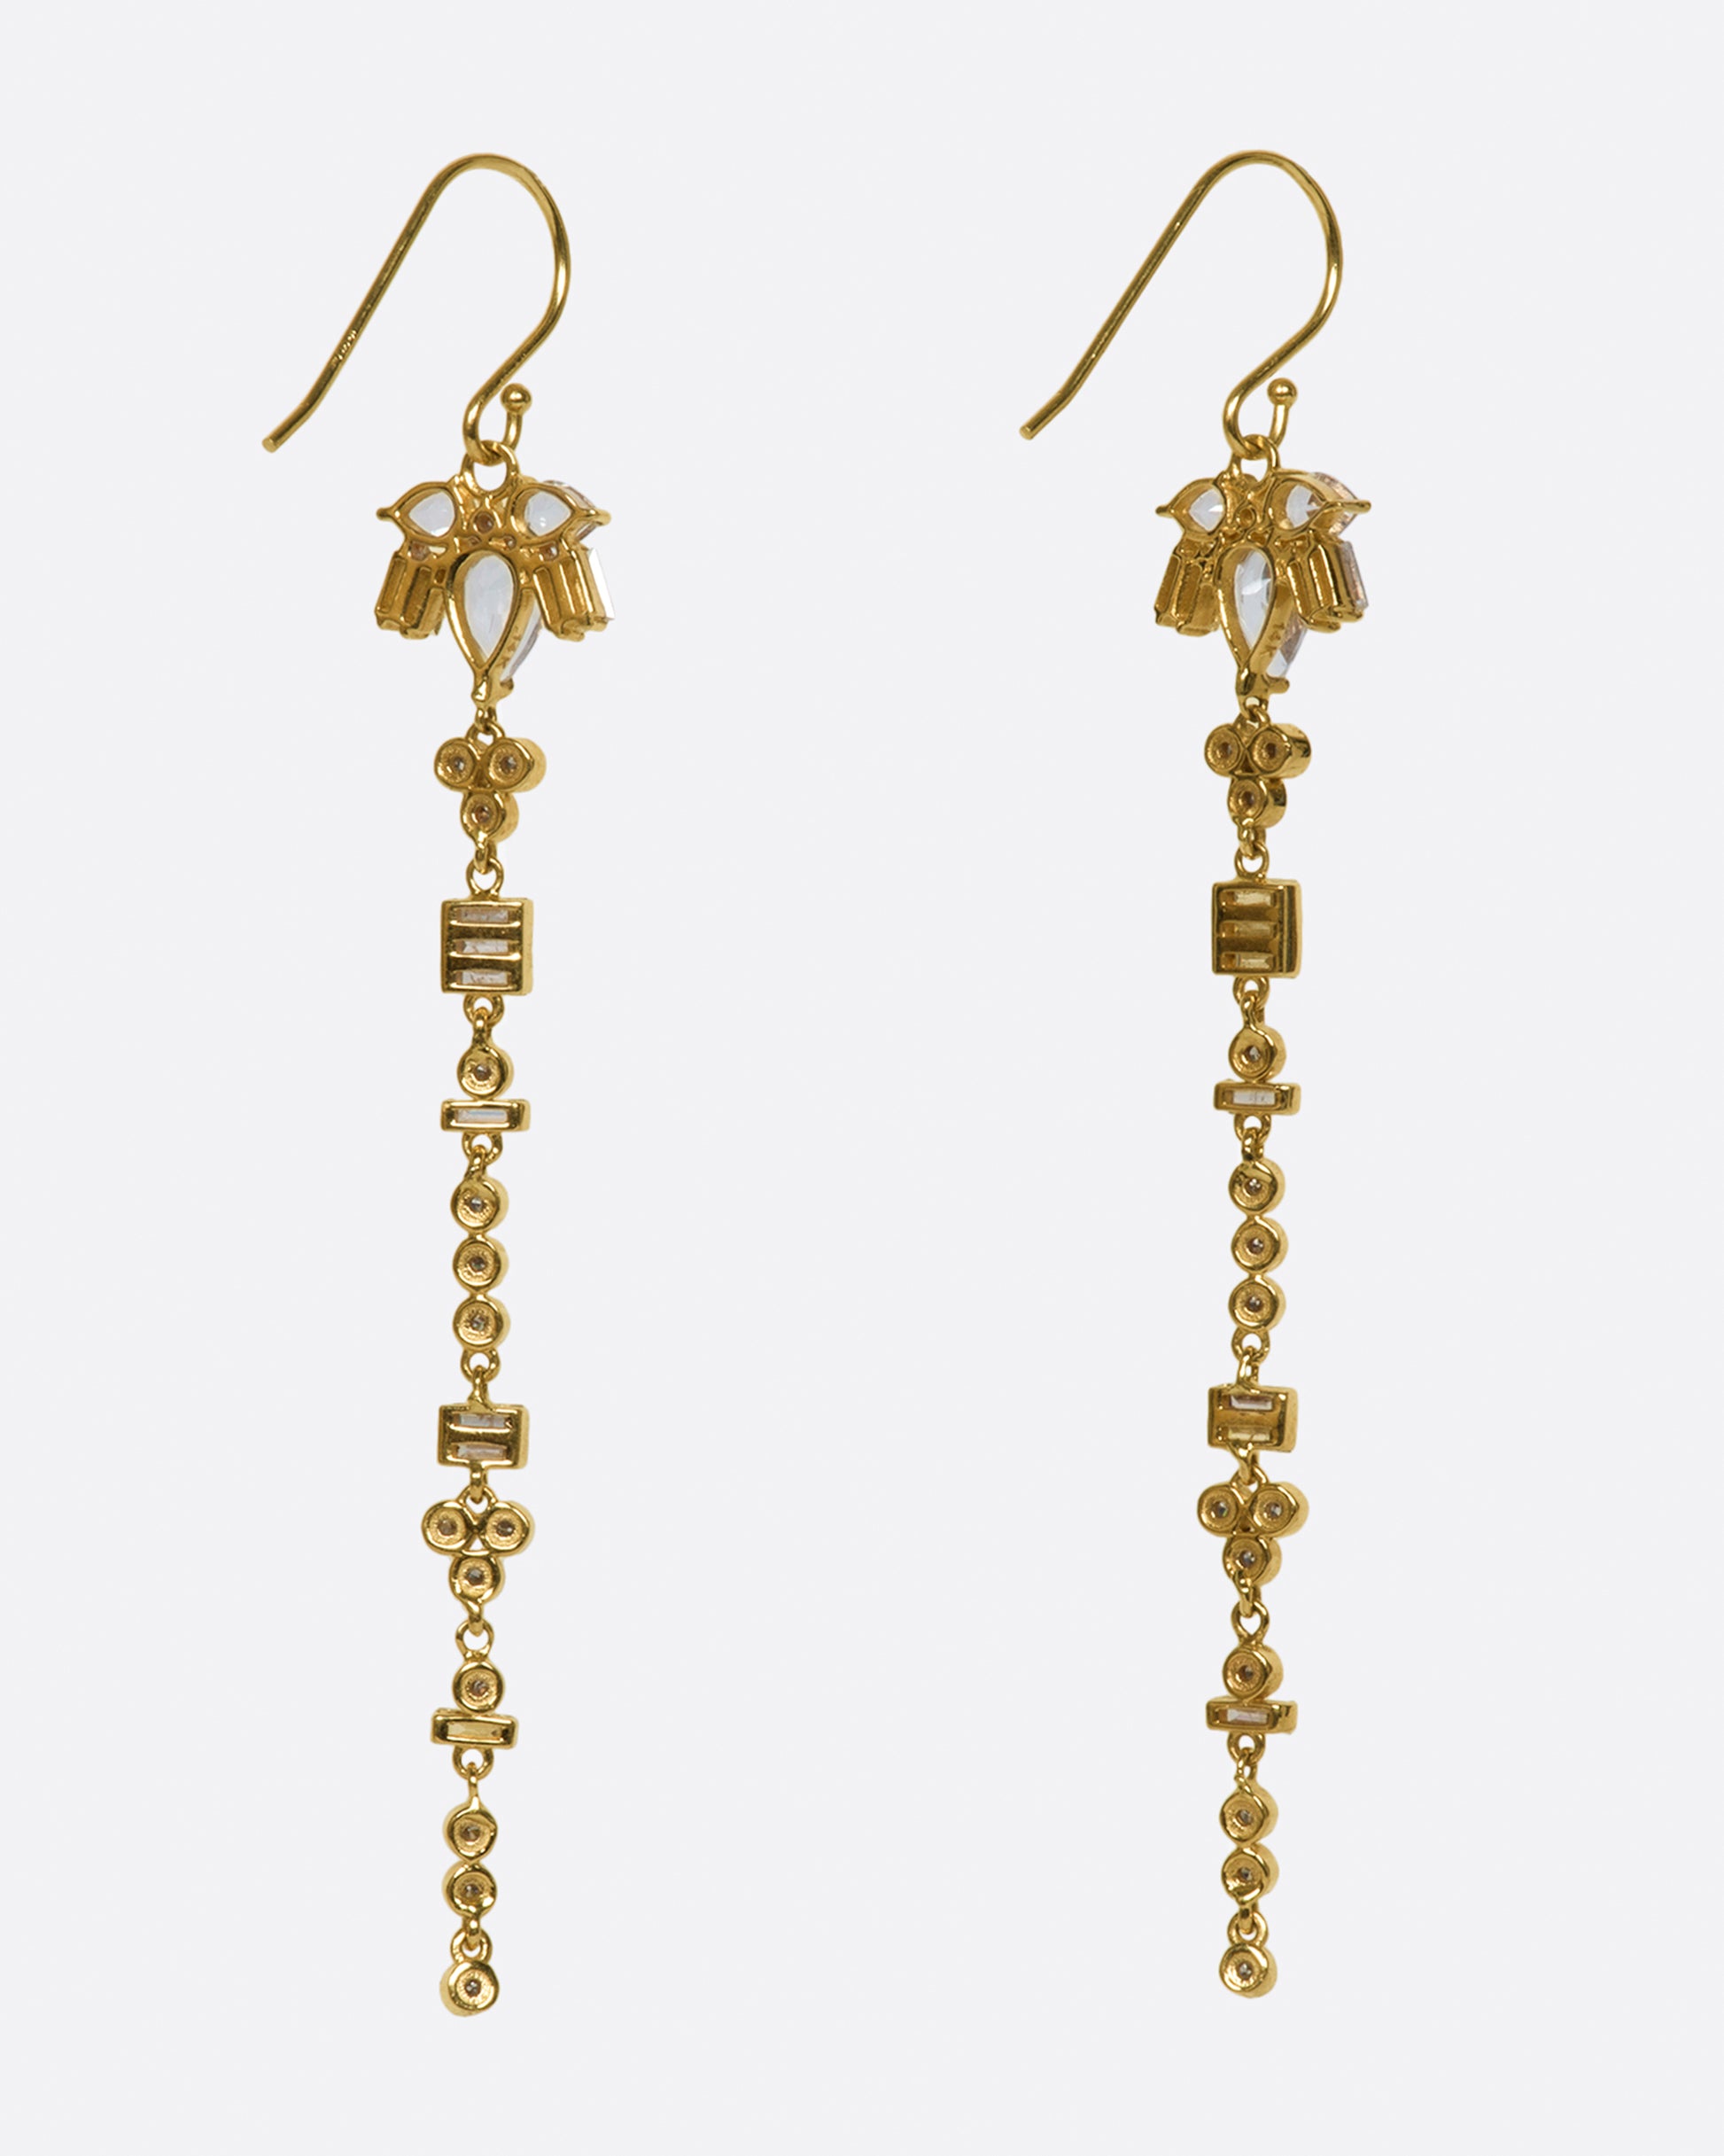 A pair of 14k gold drop earrings with a geometric variety of white topaz and diamonds.